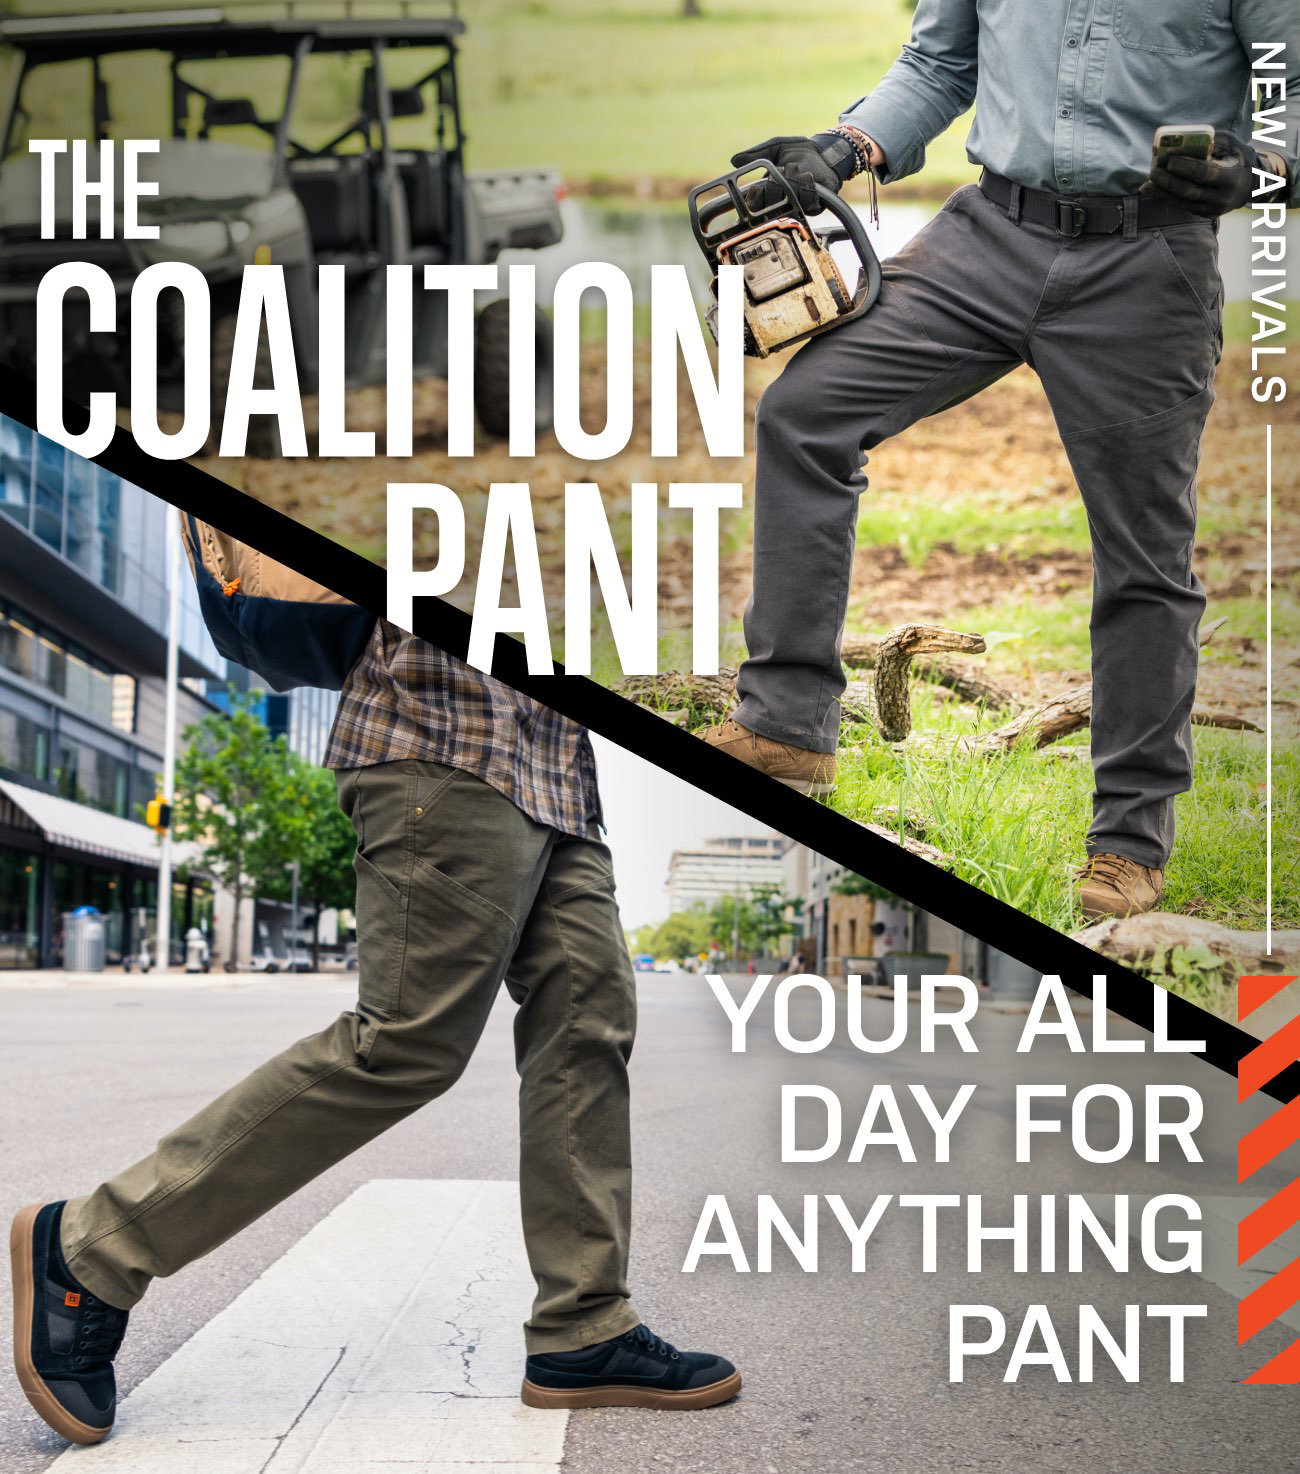 5.11 Tactical: New Coalition Pant Functional comfort! | Milled